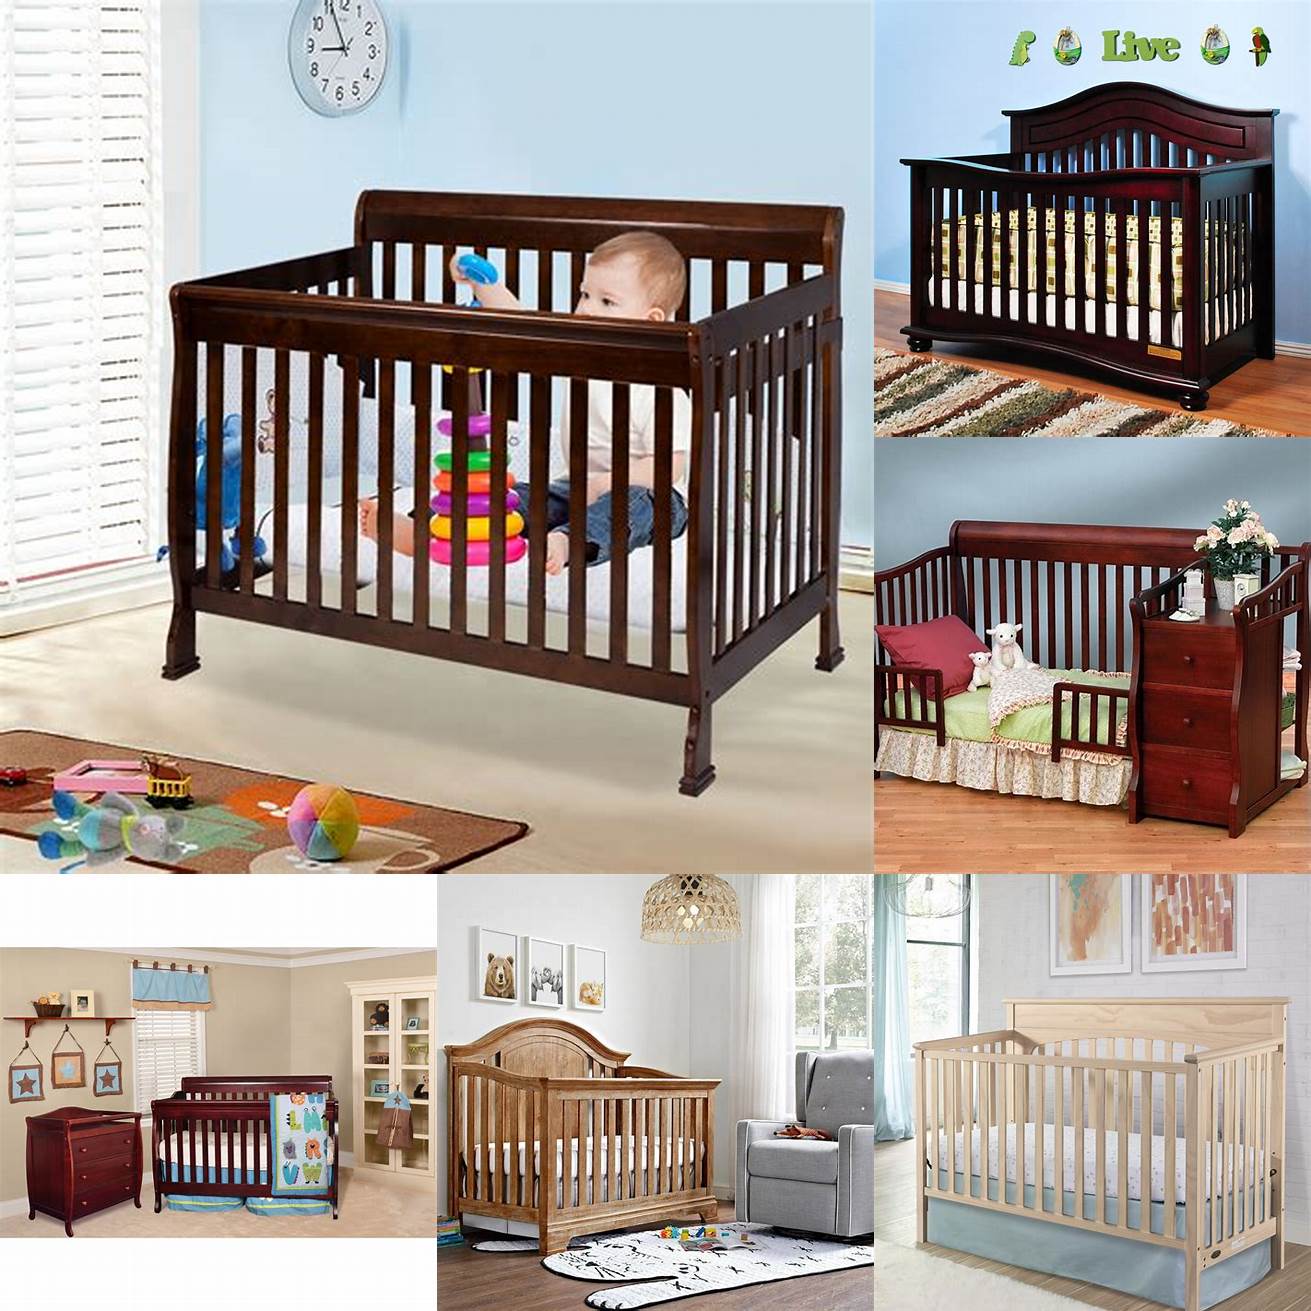 A convertible baby furniture set can be a cost-effective option